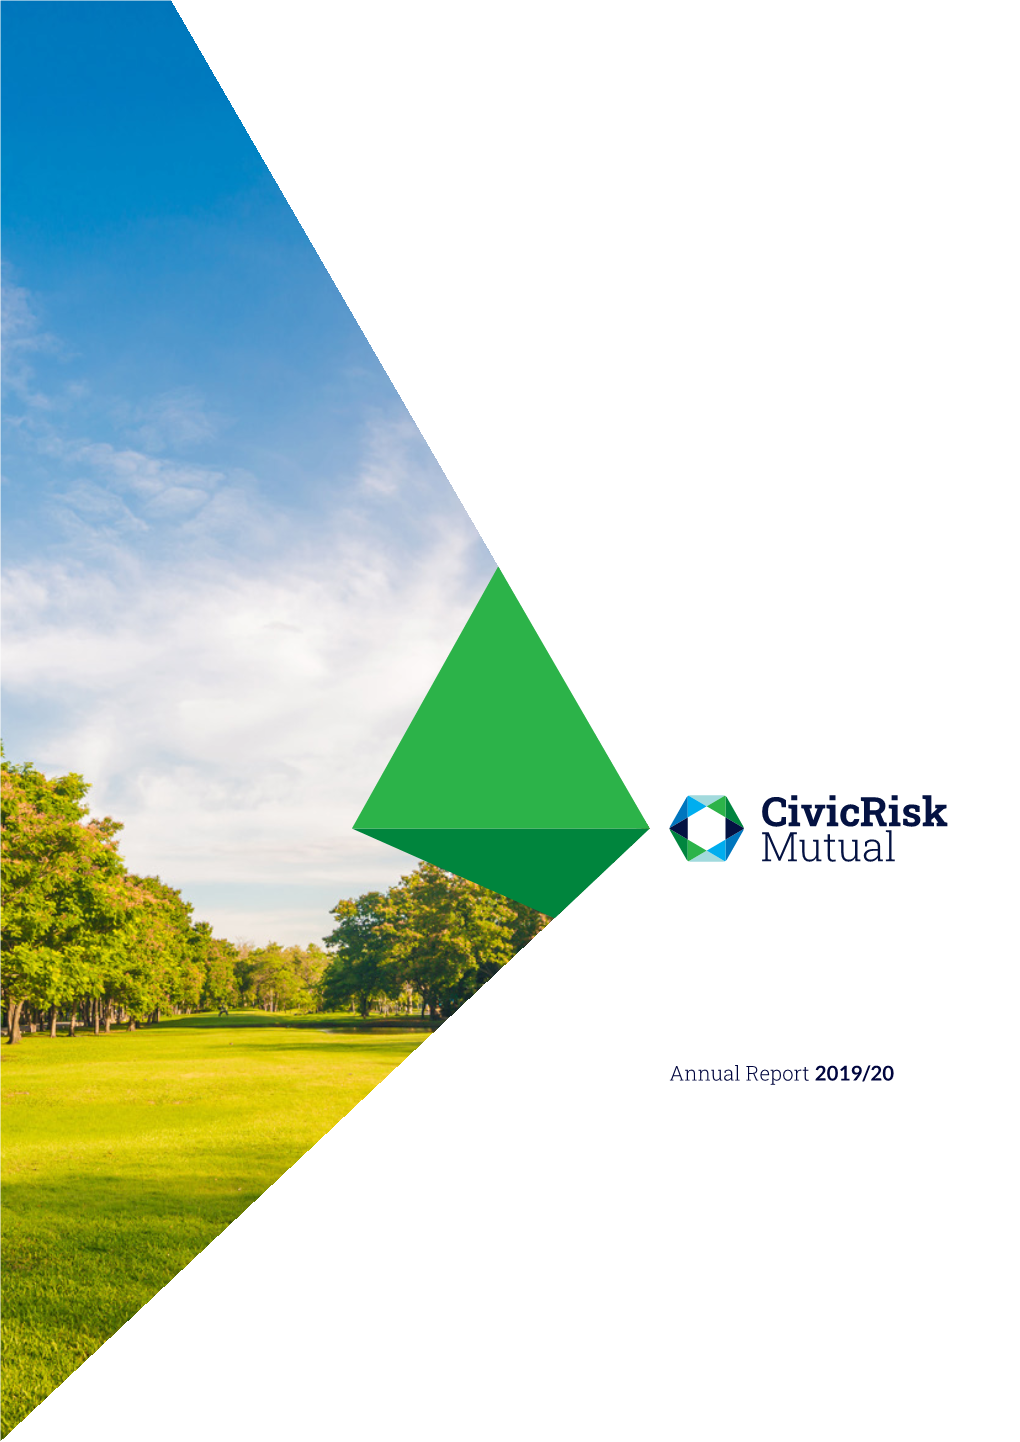 Annual Report 2019/20 Welcome to Civicrisk Mutual Limited’S 2019/20 Annual Report